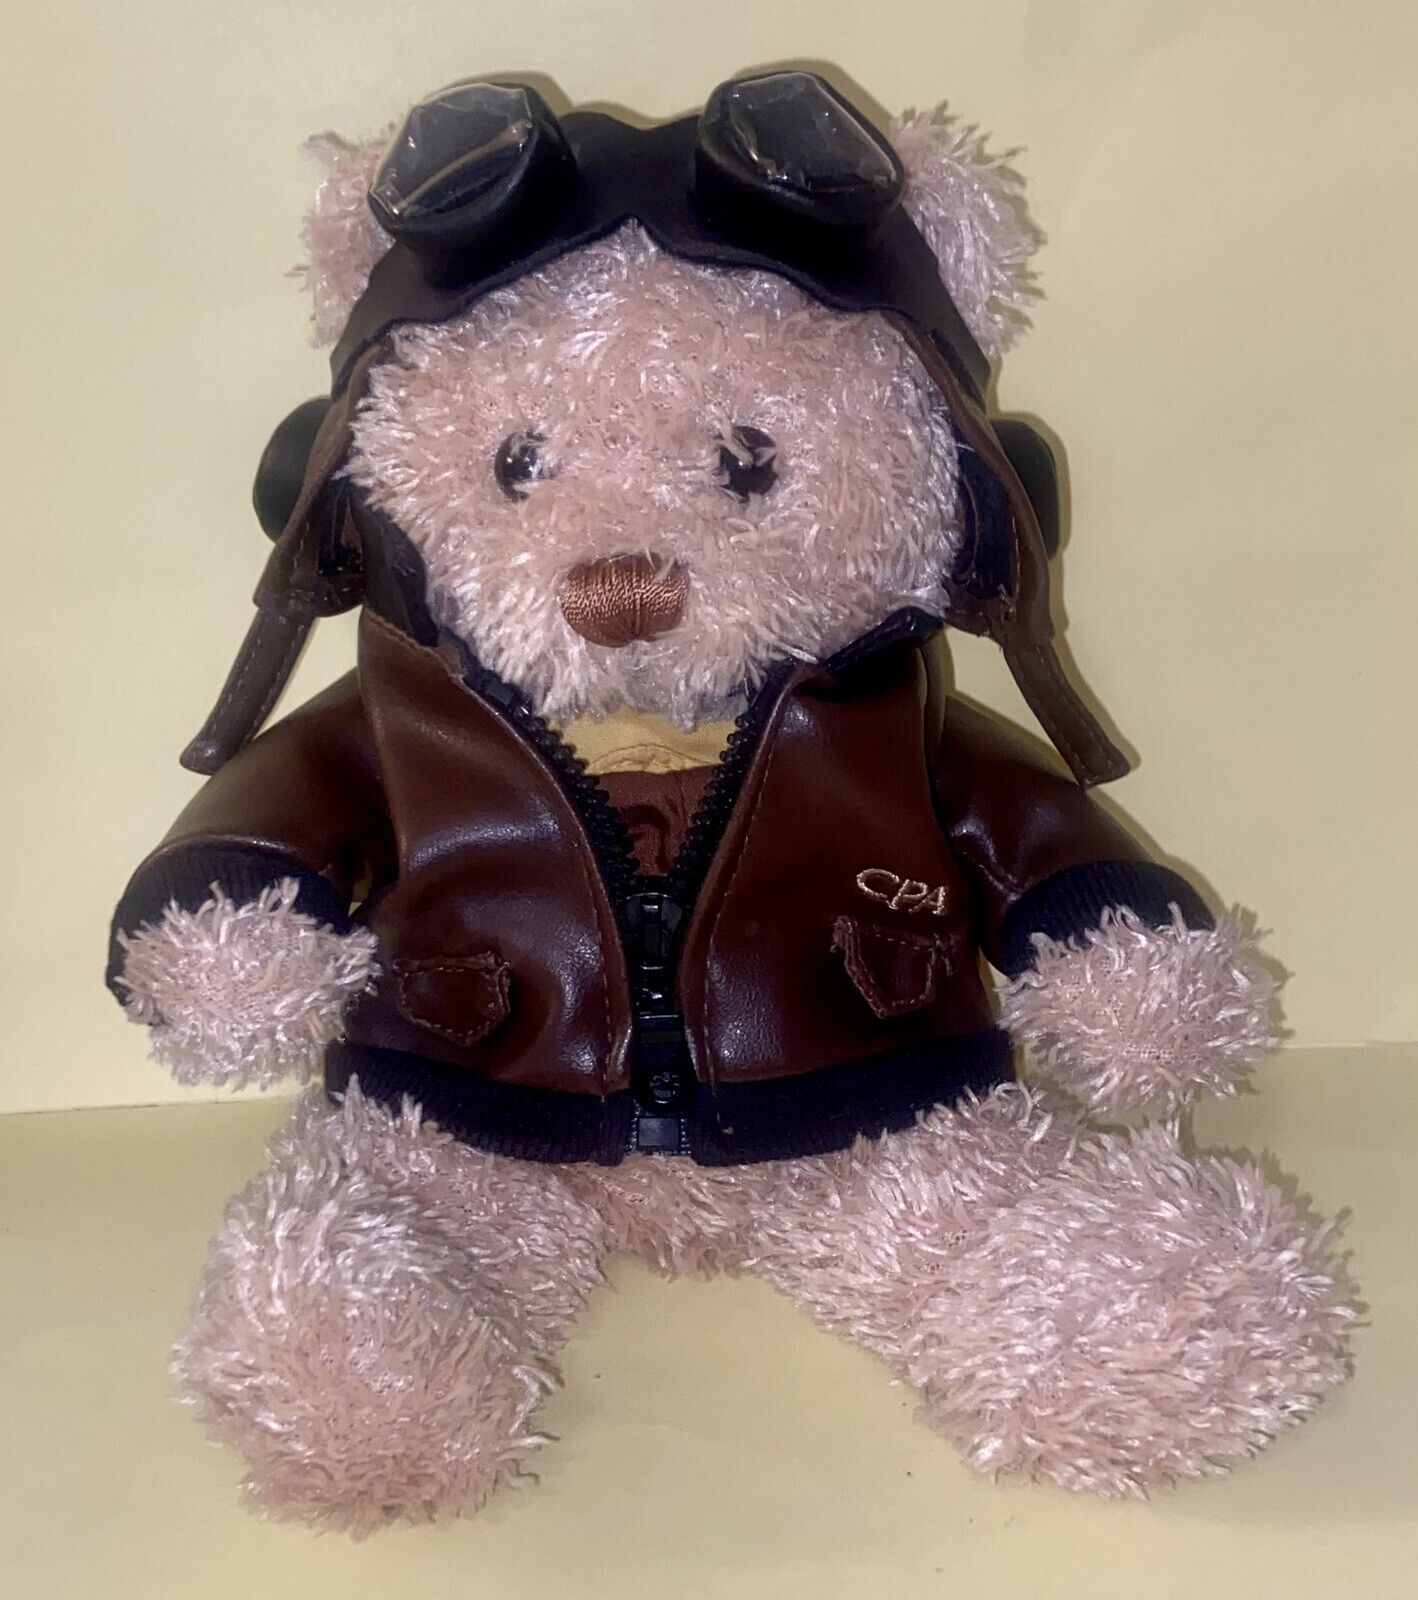 CATHAY PACIFIC AIRWAYS Airline 7” Vintage Pilot Teddy Bear Plush Stuffed Toy